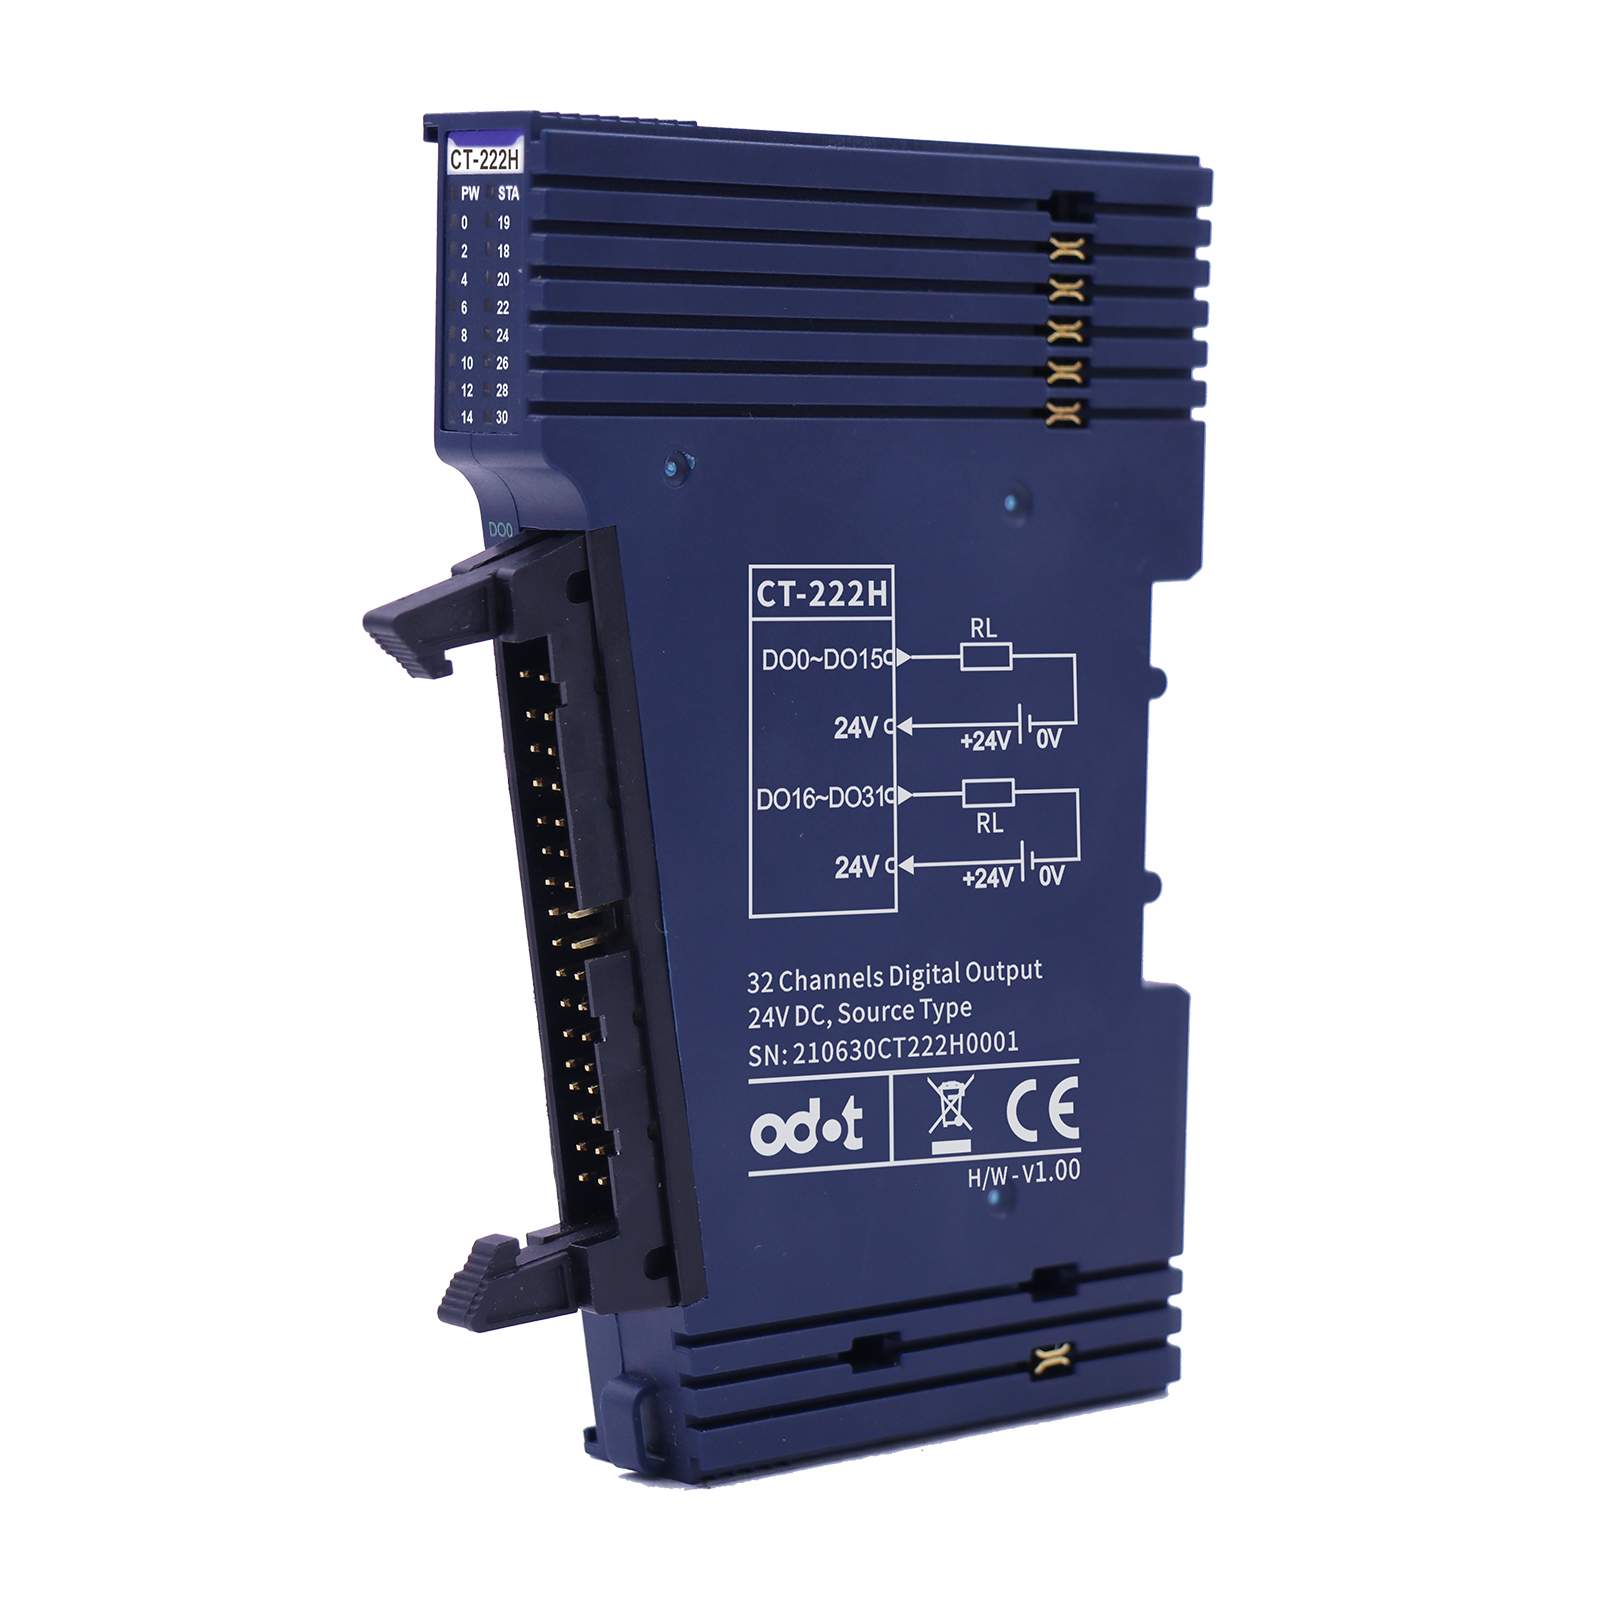 China wholesale Io Scada - CT-222H: 32 channels digital output, source, 24Vdc/0.5A，34Pin male connector – ODOT